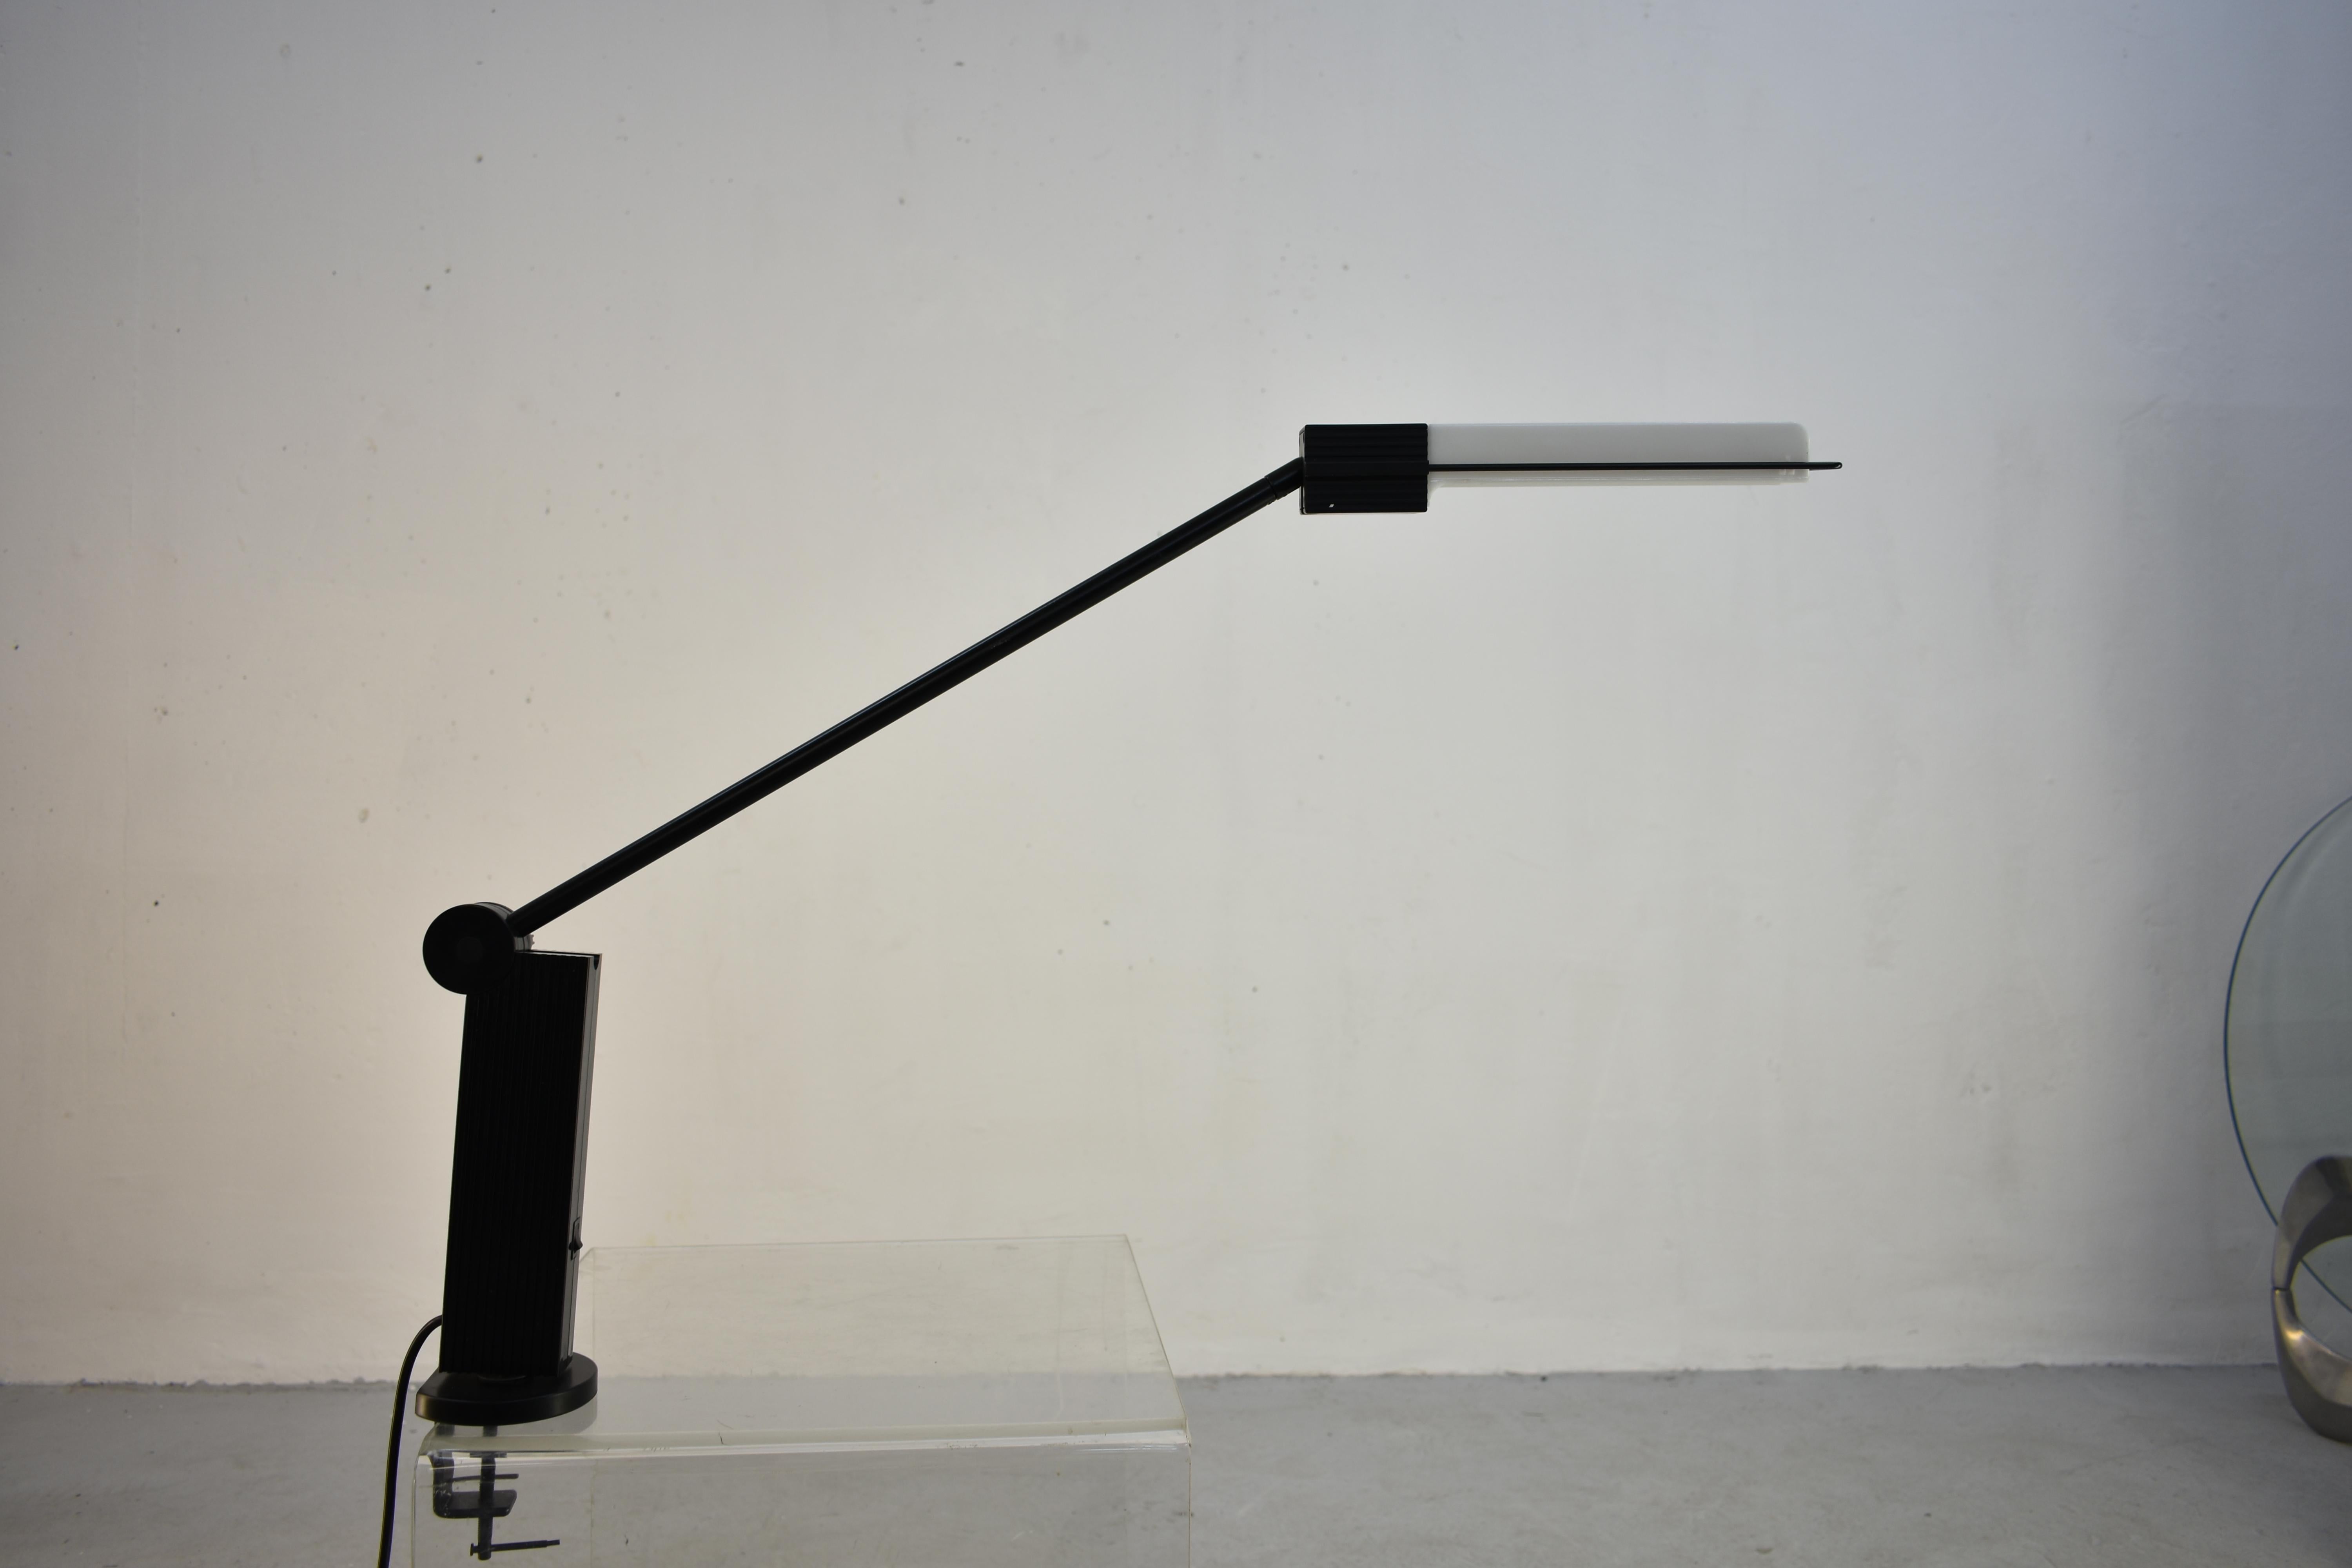 'Alistro' desk lamp by Ernesto Gismondi for Artemide with black body and white acrylic lampshade.

Designed in 1983 and manufactured during the 1980s.

The lamp was never in use and remains in mint condition